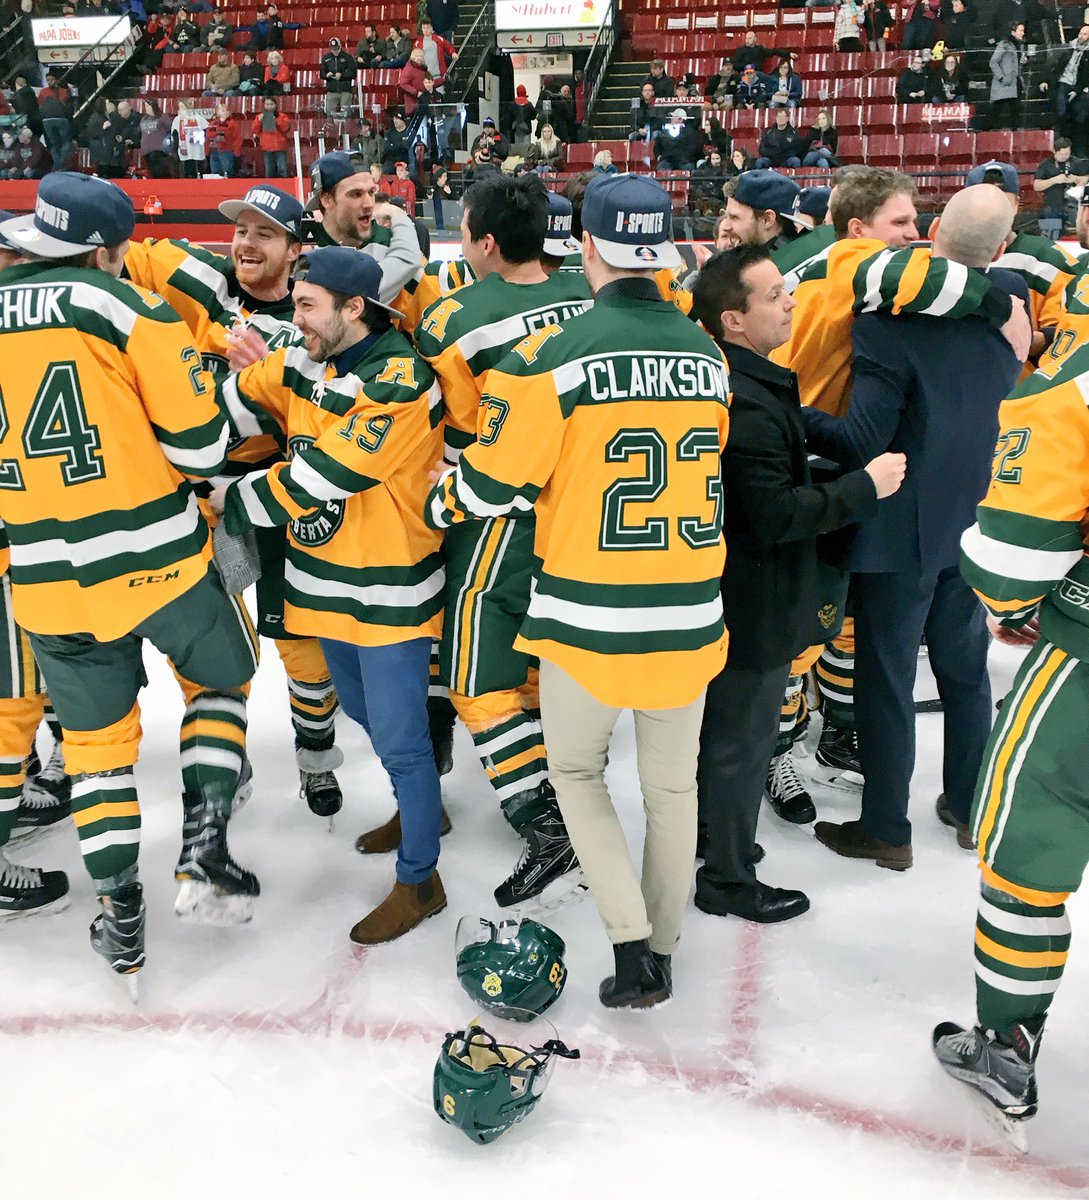 The University of Alberta's Golden Bears won their 16th national championship on Sunday, March 18, 2018. 